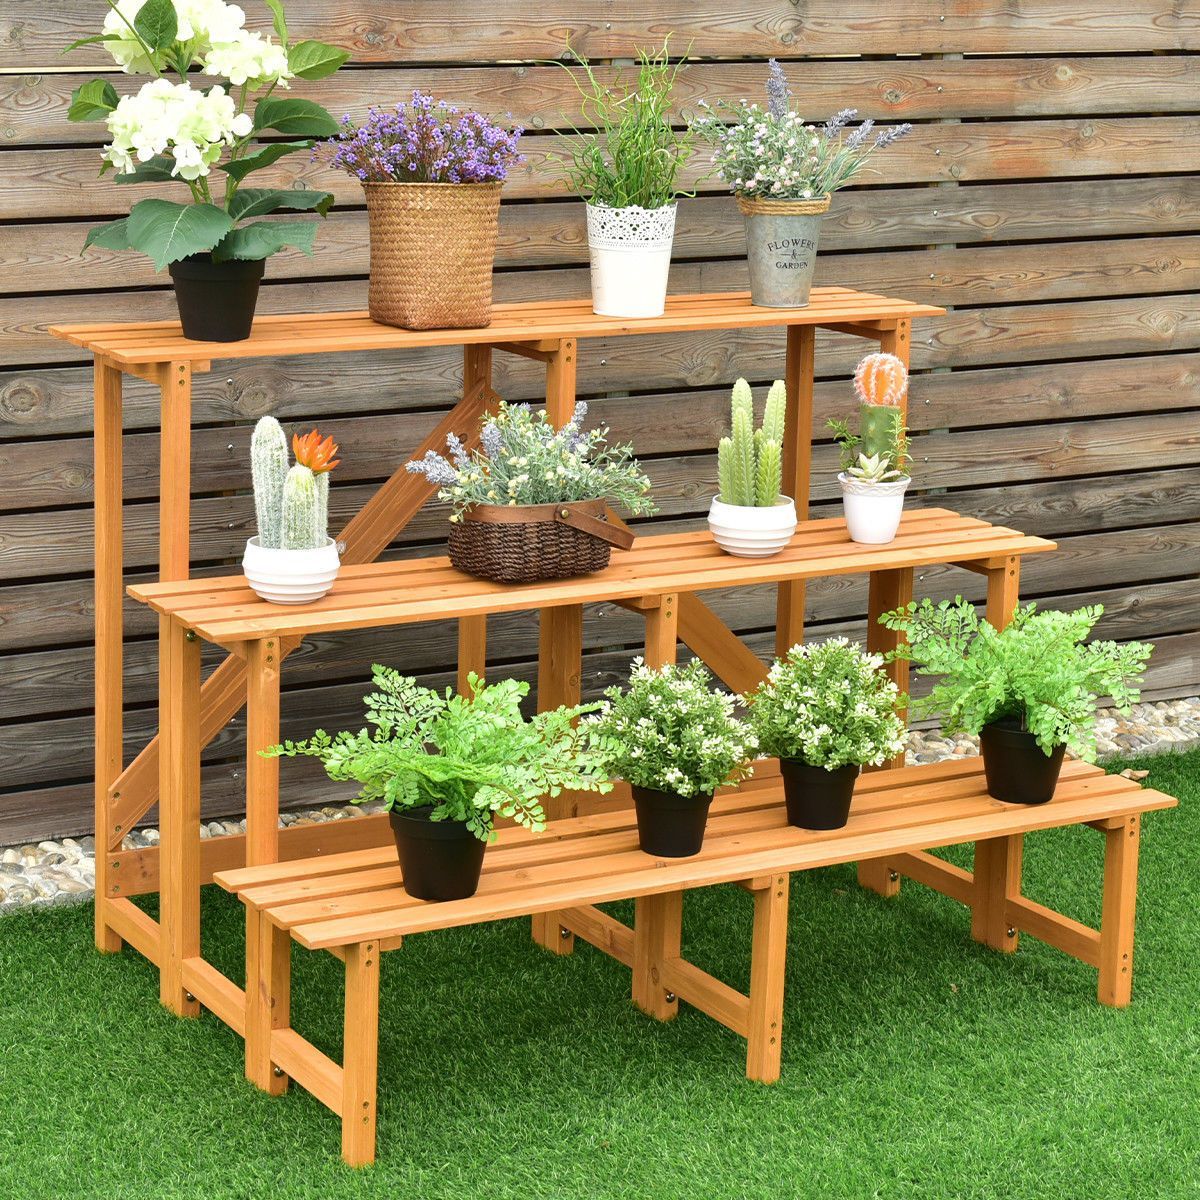 Low Wooden Plant Stand Bench